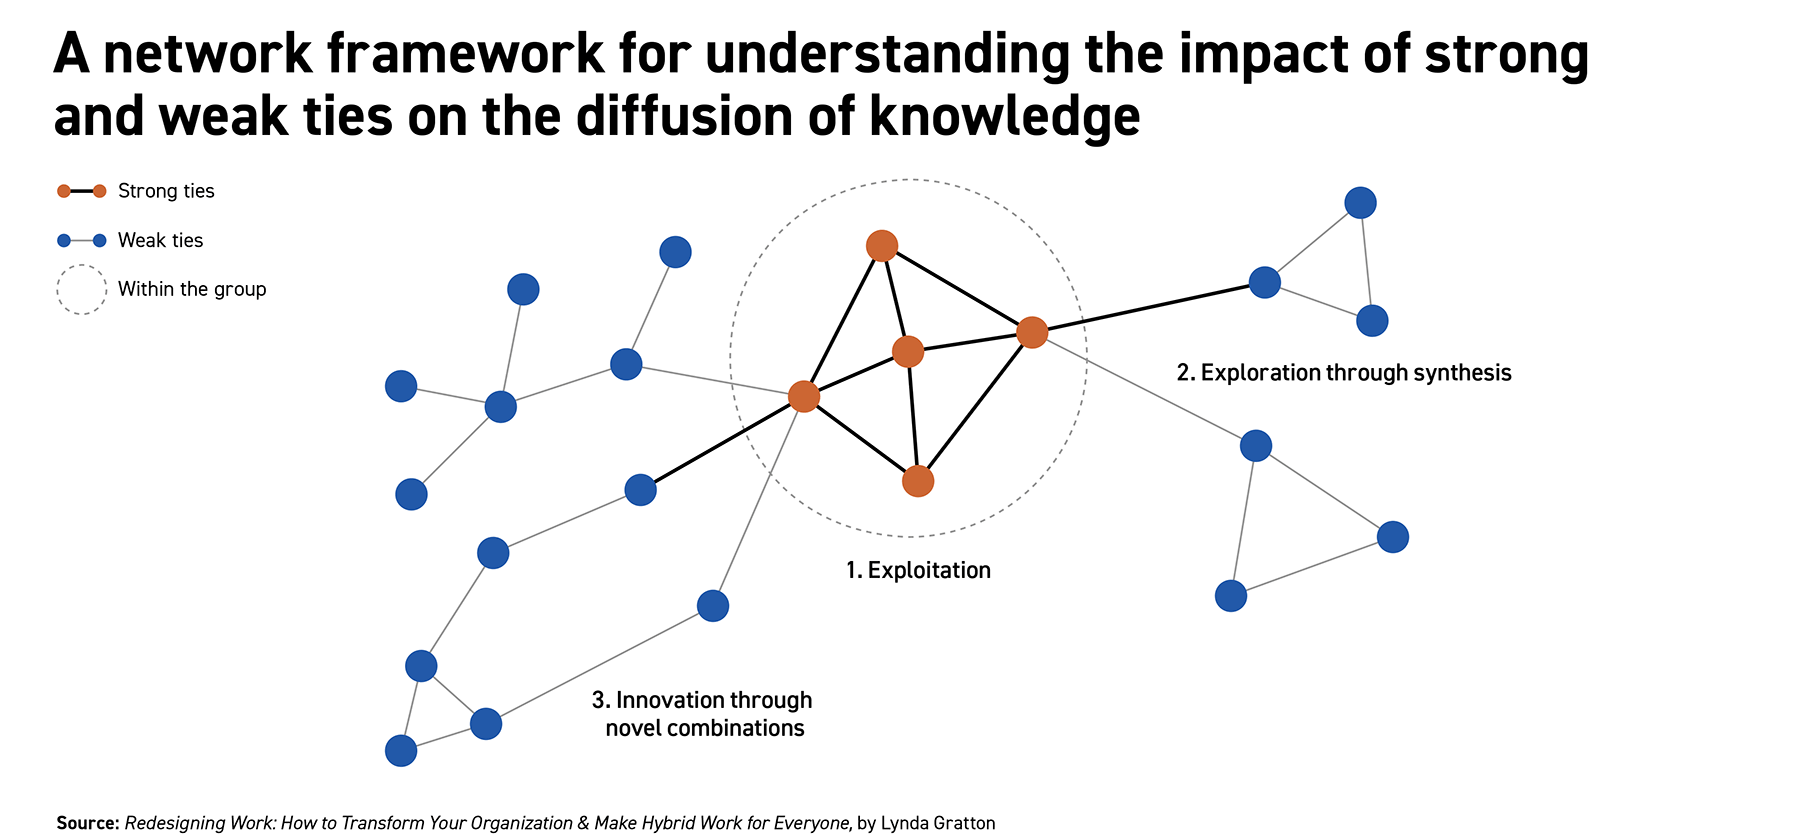 A chart showing the impact of strong and weak ties on the diffusion of knowledge.